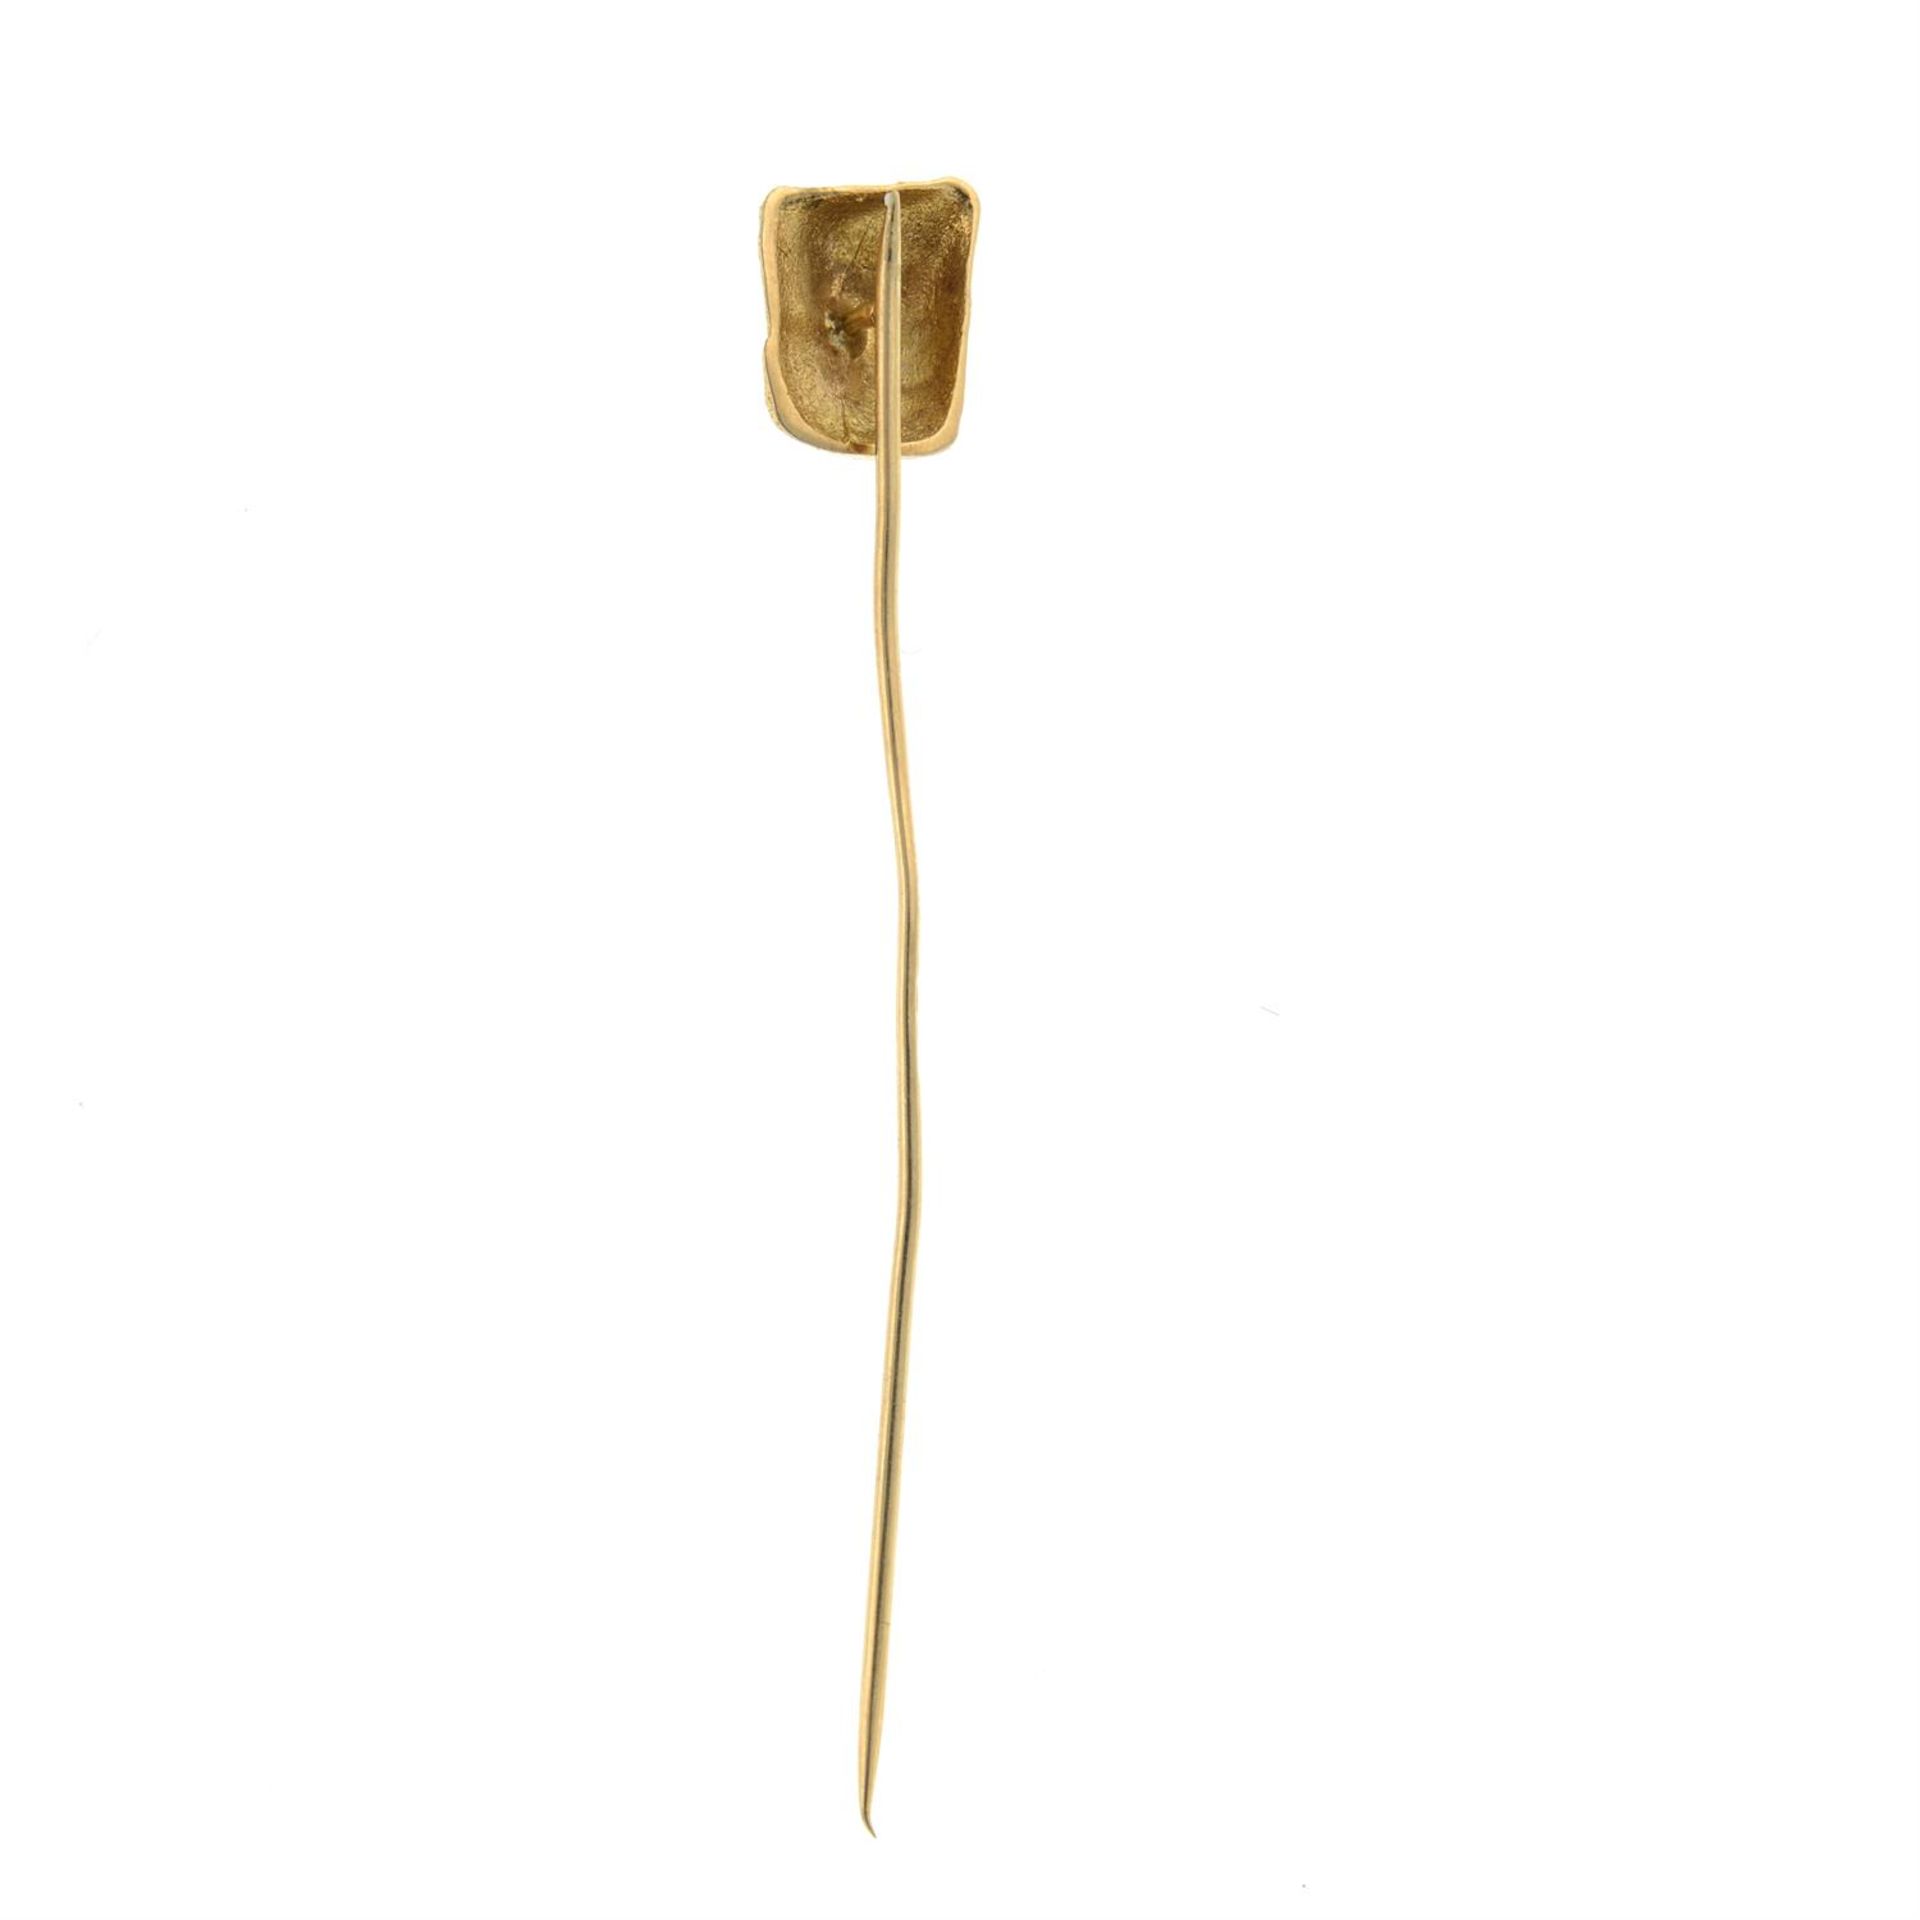 Mid 20th century 14ct gold stickpin, by Lapponia - Image 2 of 2